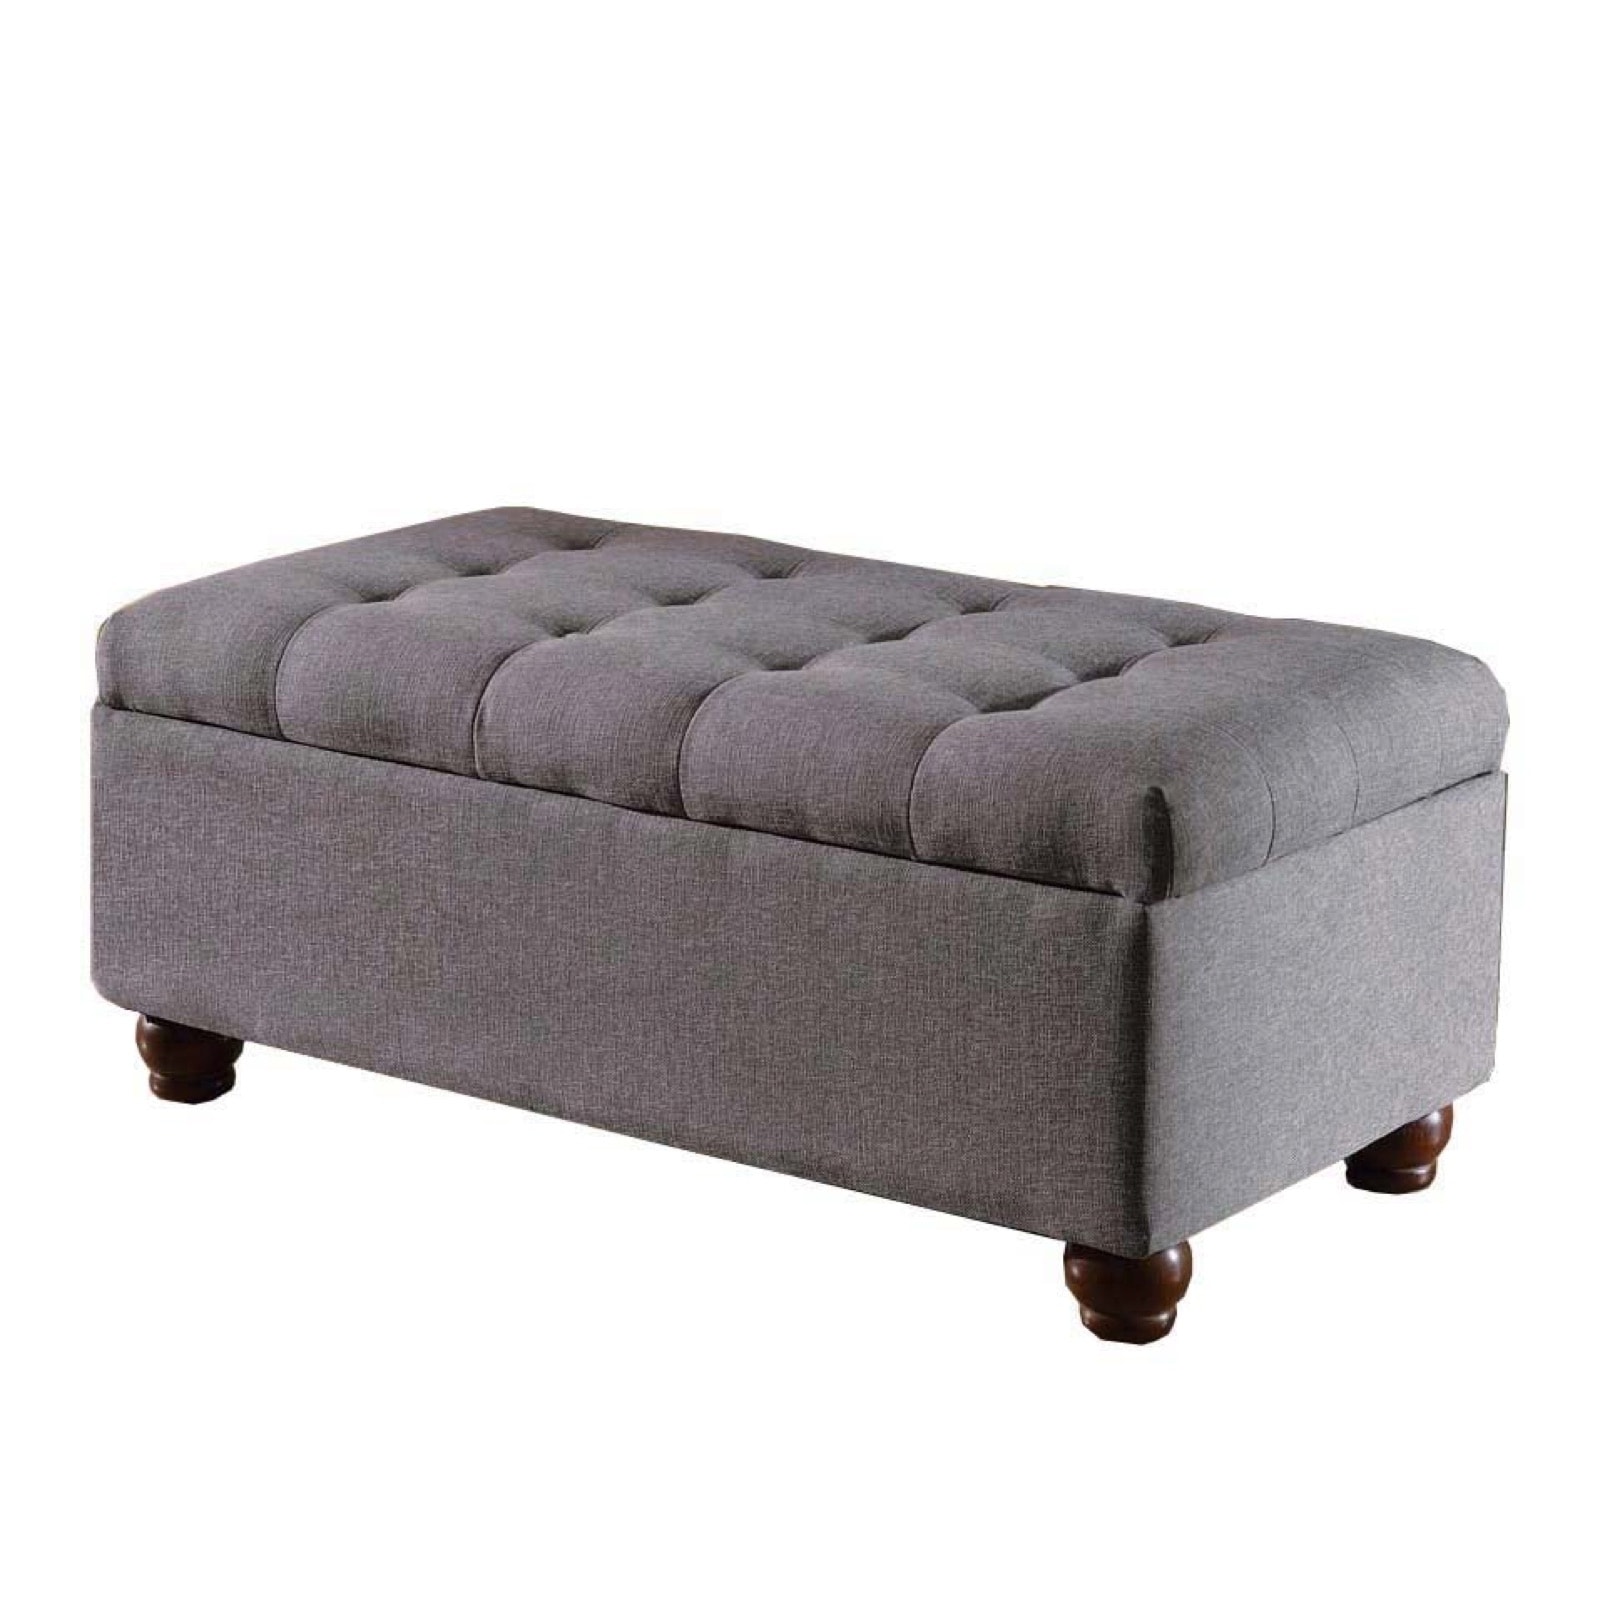 Fabric Upholstered Tufted Storage Bench With Wooden Bun Feet